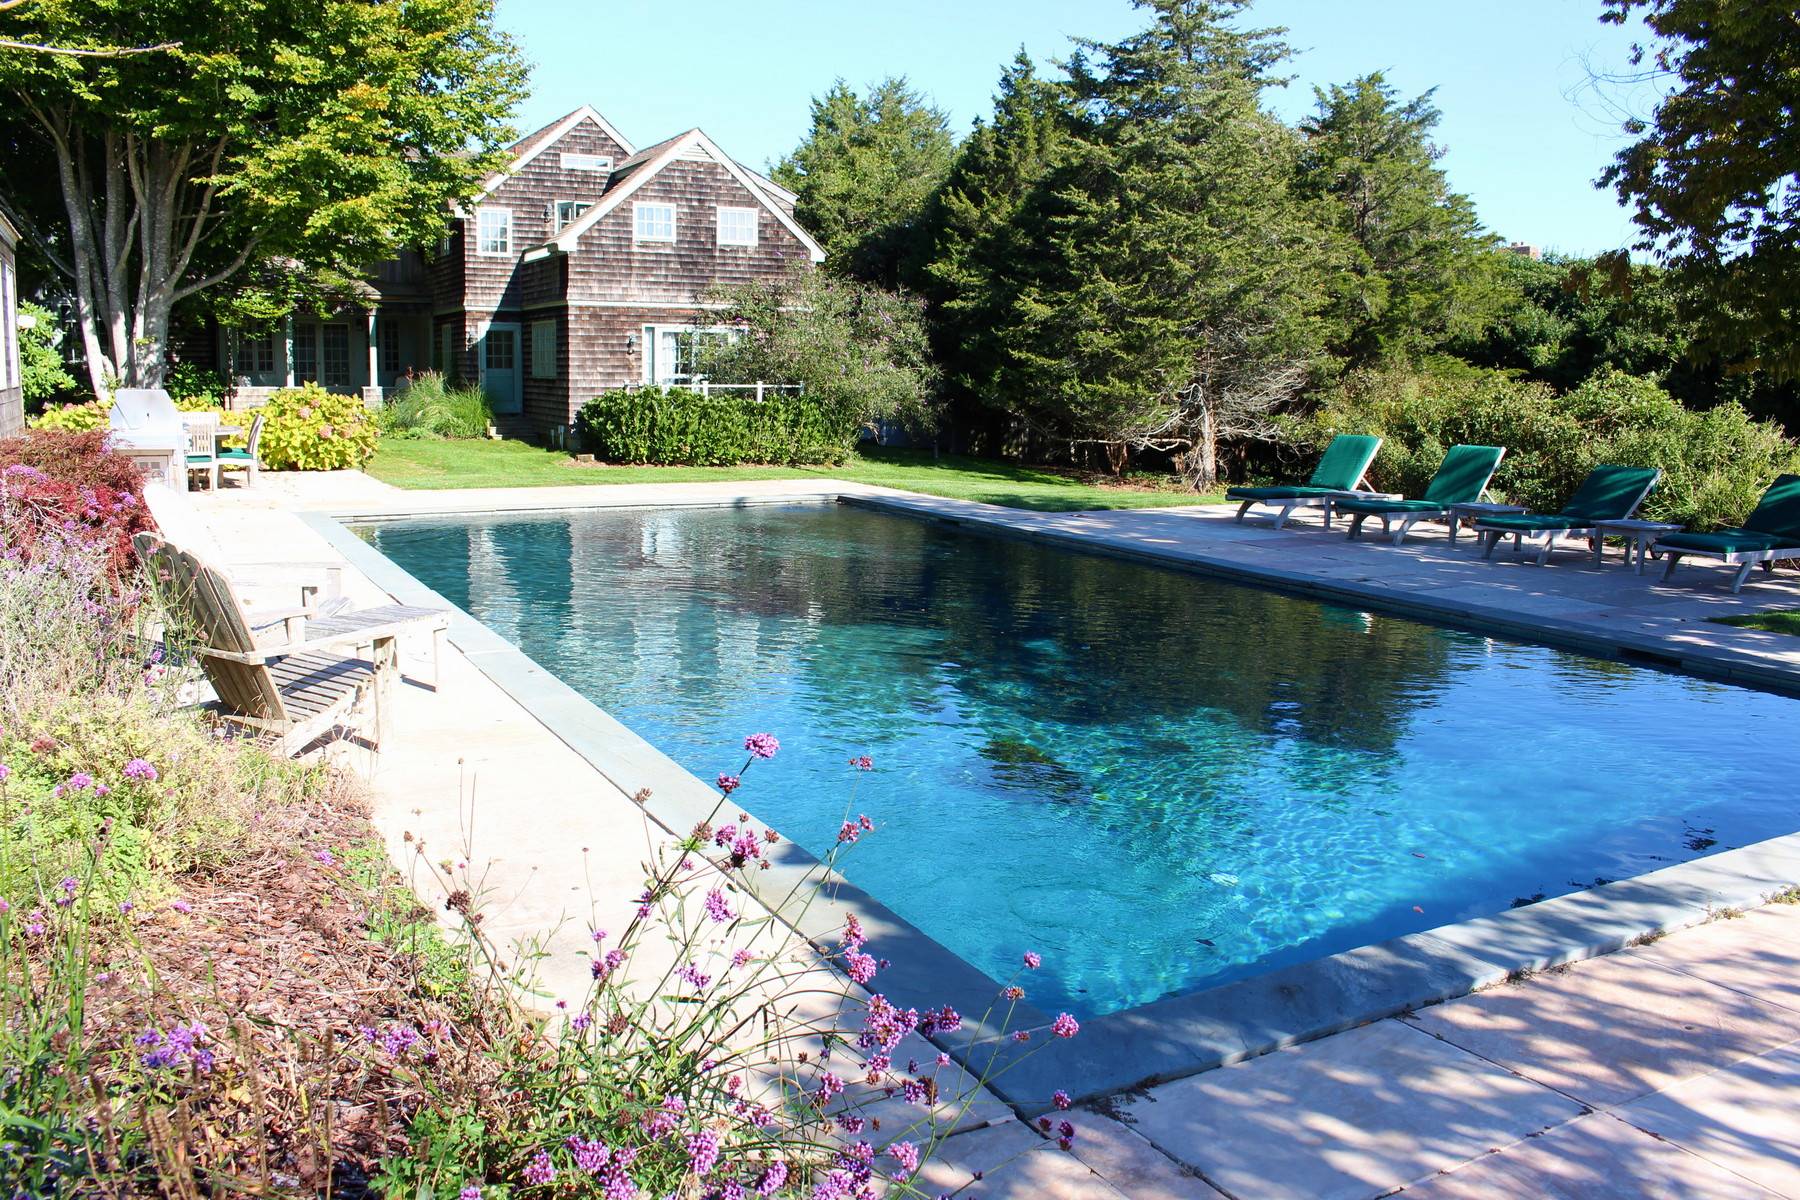 SAGAPONACK 5 BED BARNSTYLE HOUSE WITH POOL AND TENNIS